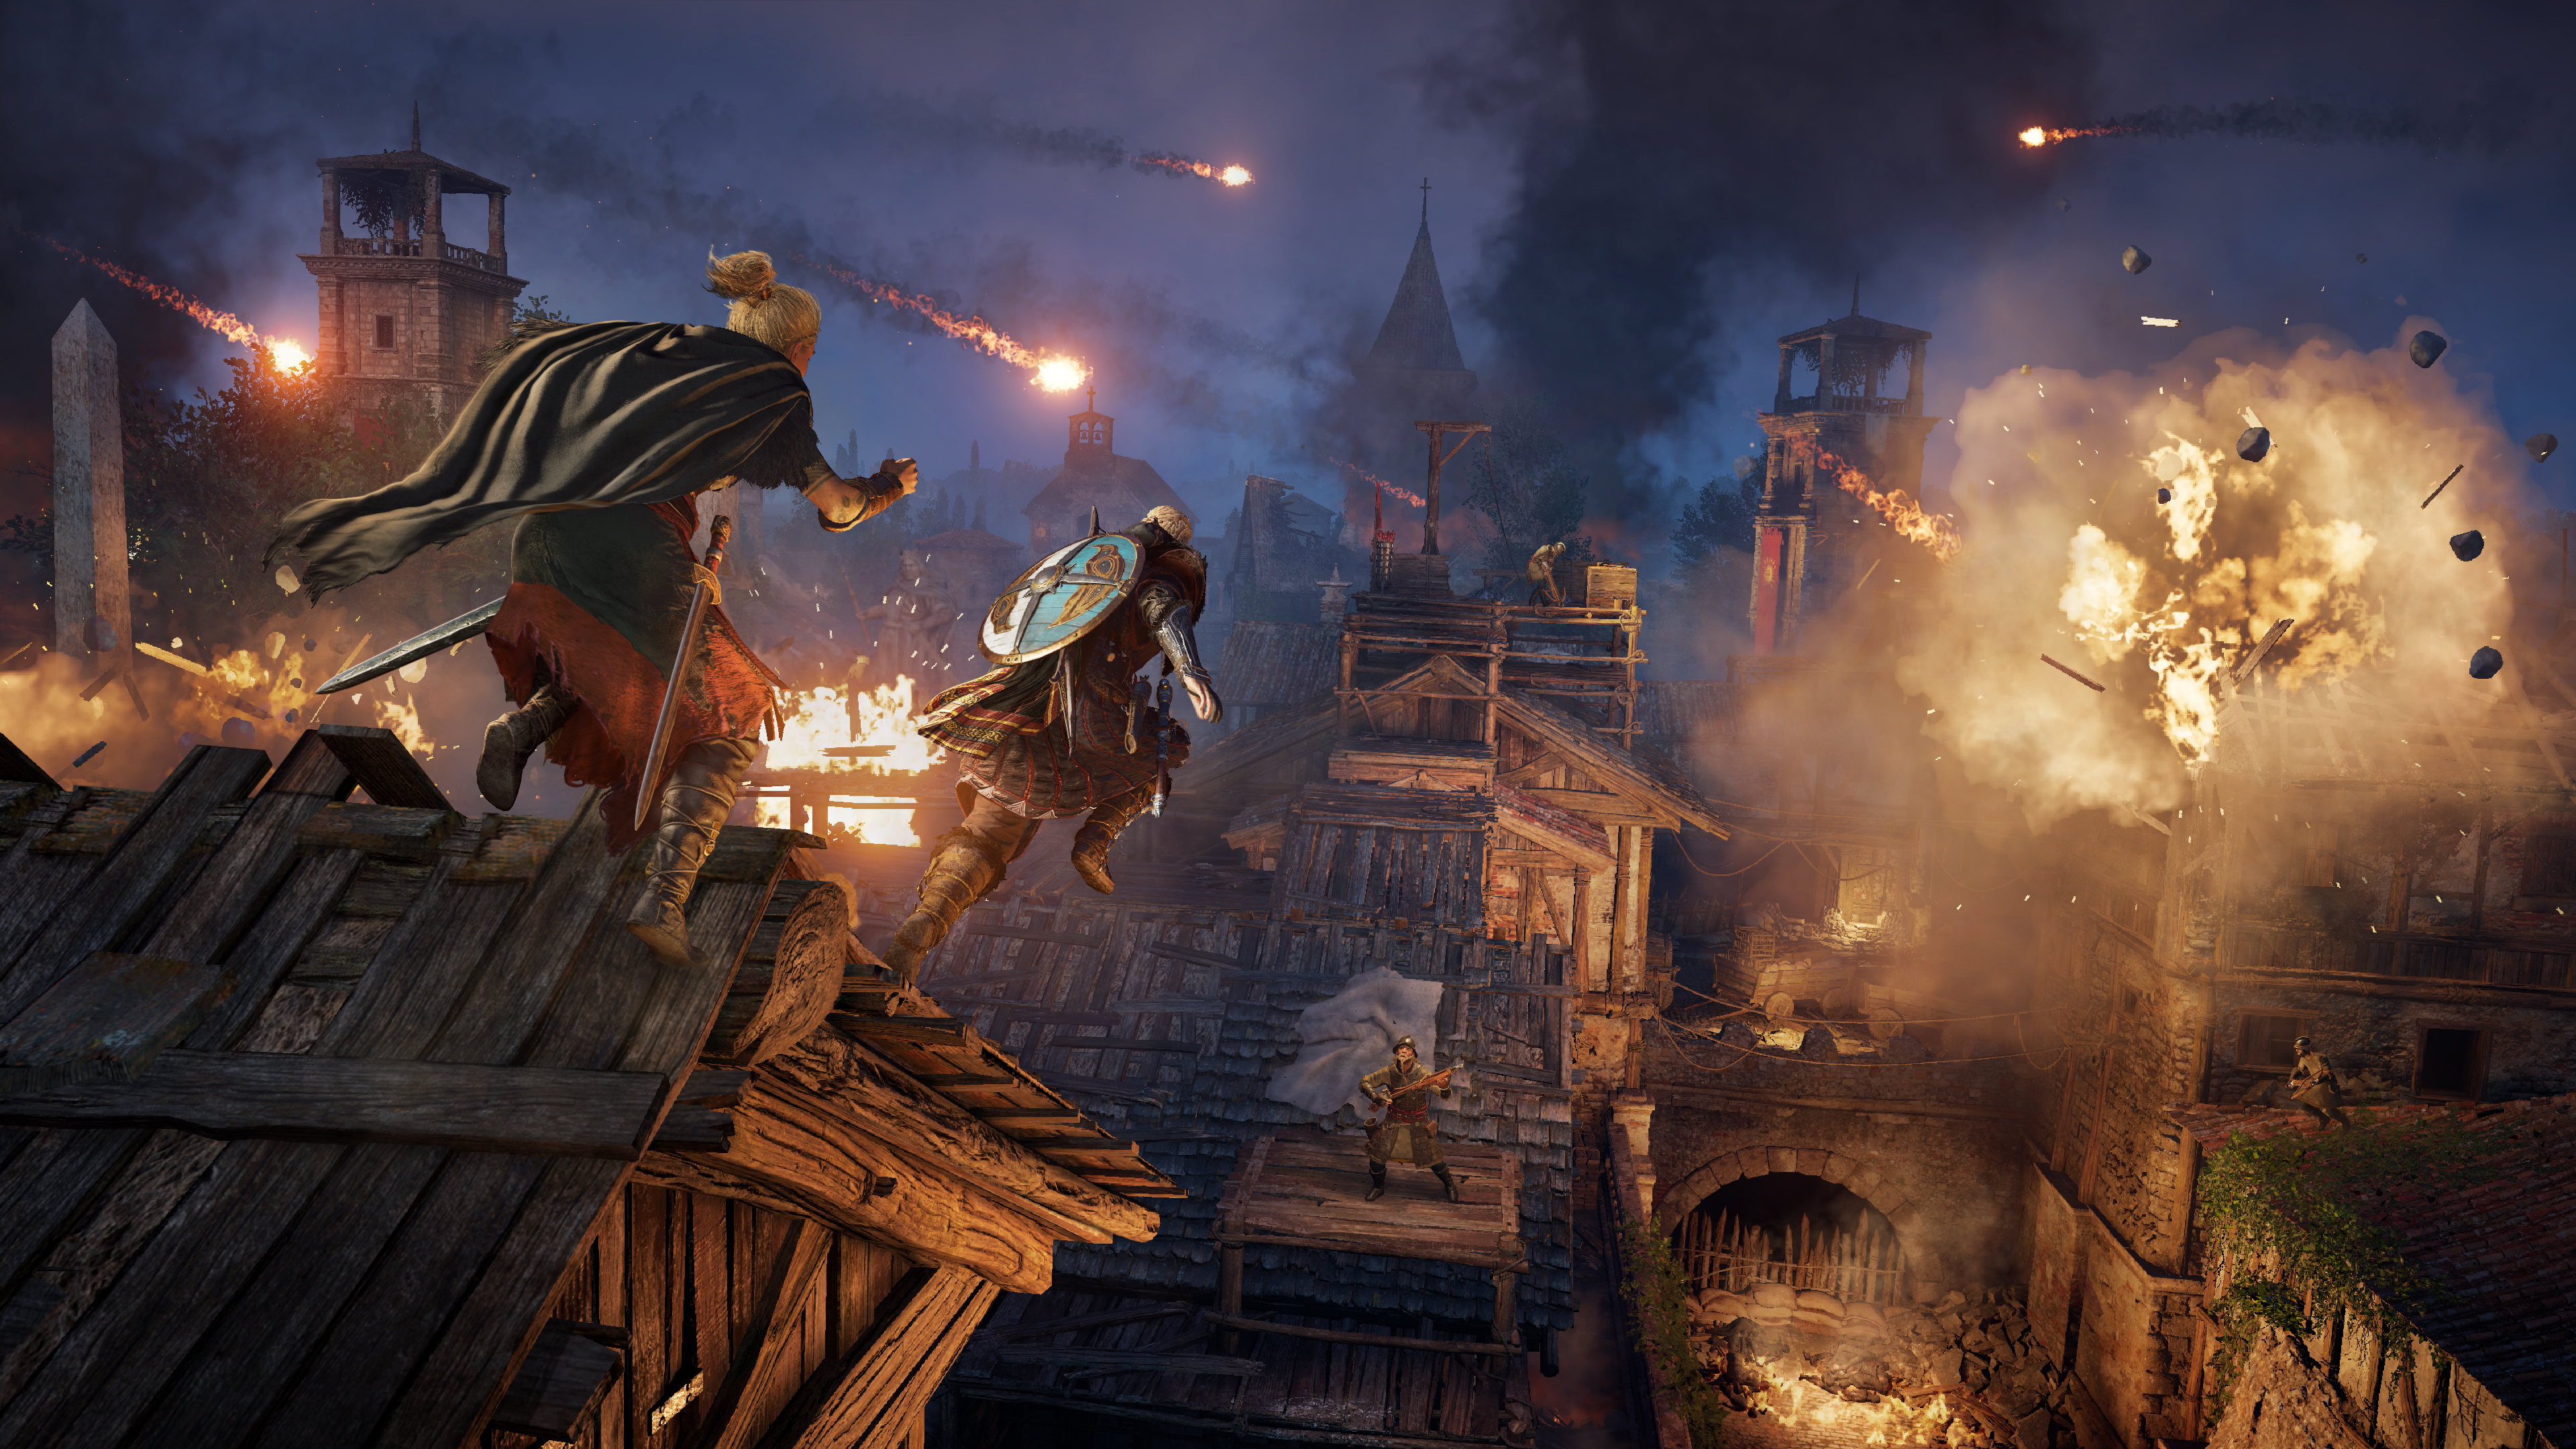 Play Time: How Long is Assassin's Creed Valhalla (Game Length)?